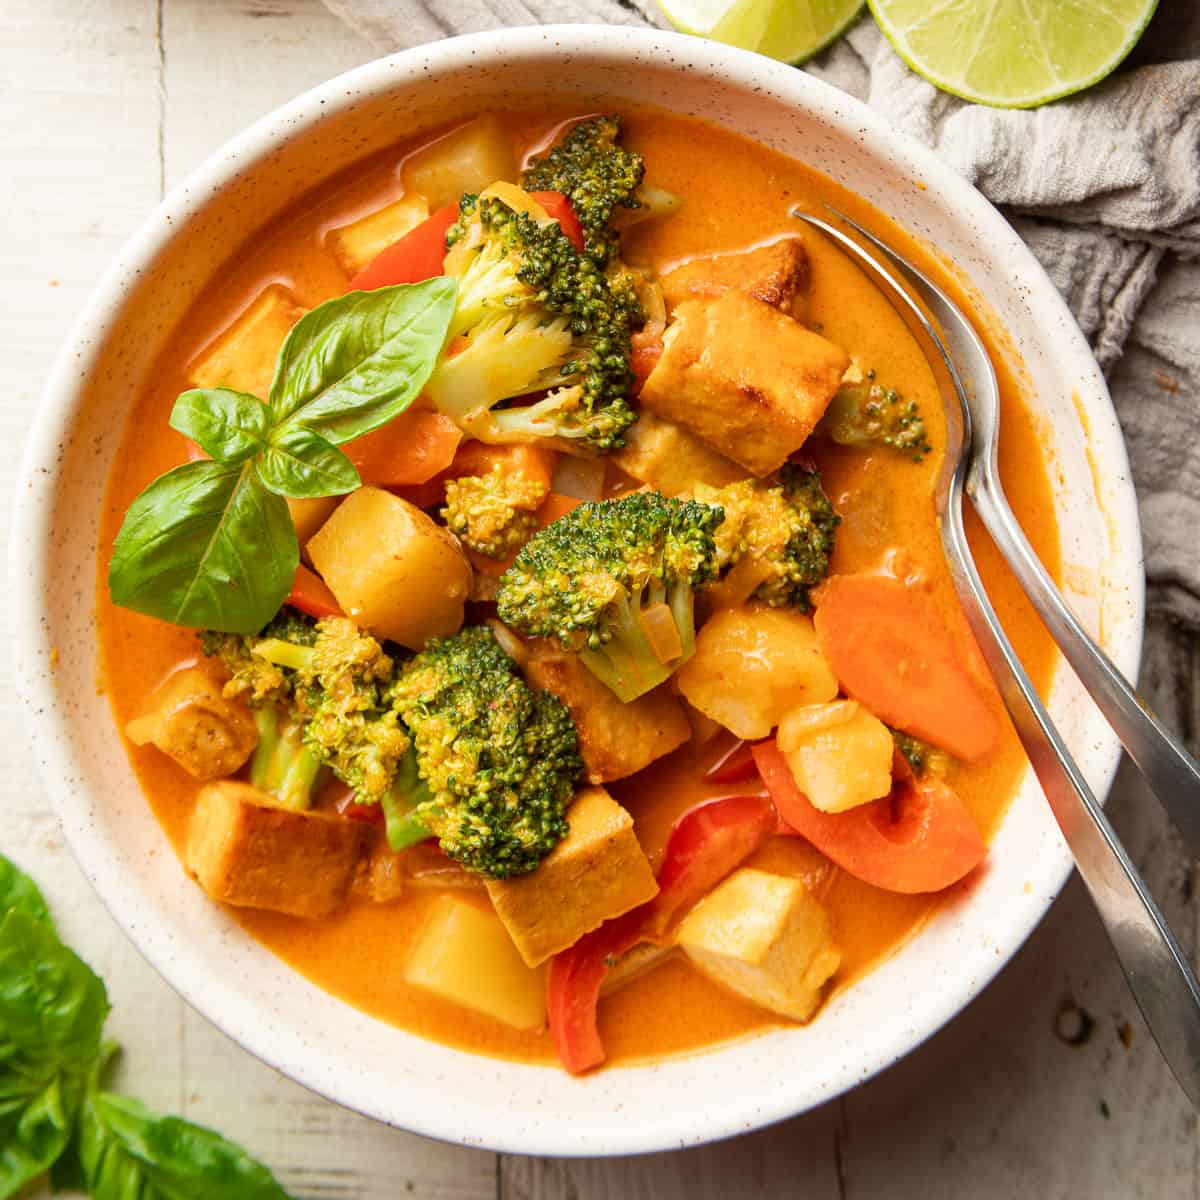 Bowl of vegan red curry topped with fresh basil leaves.